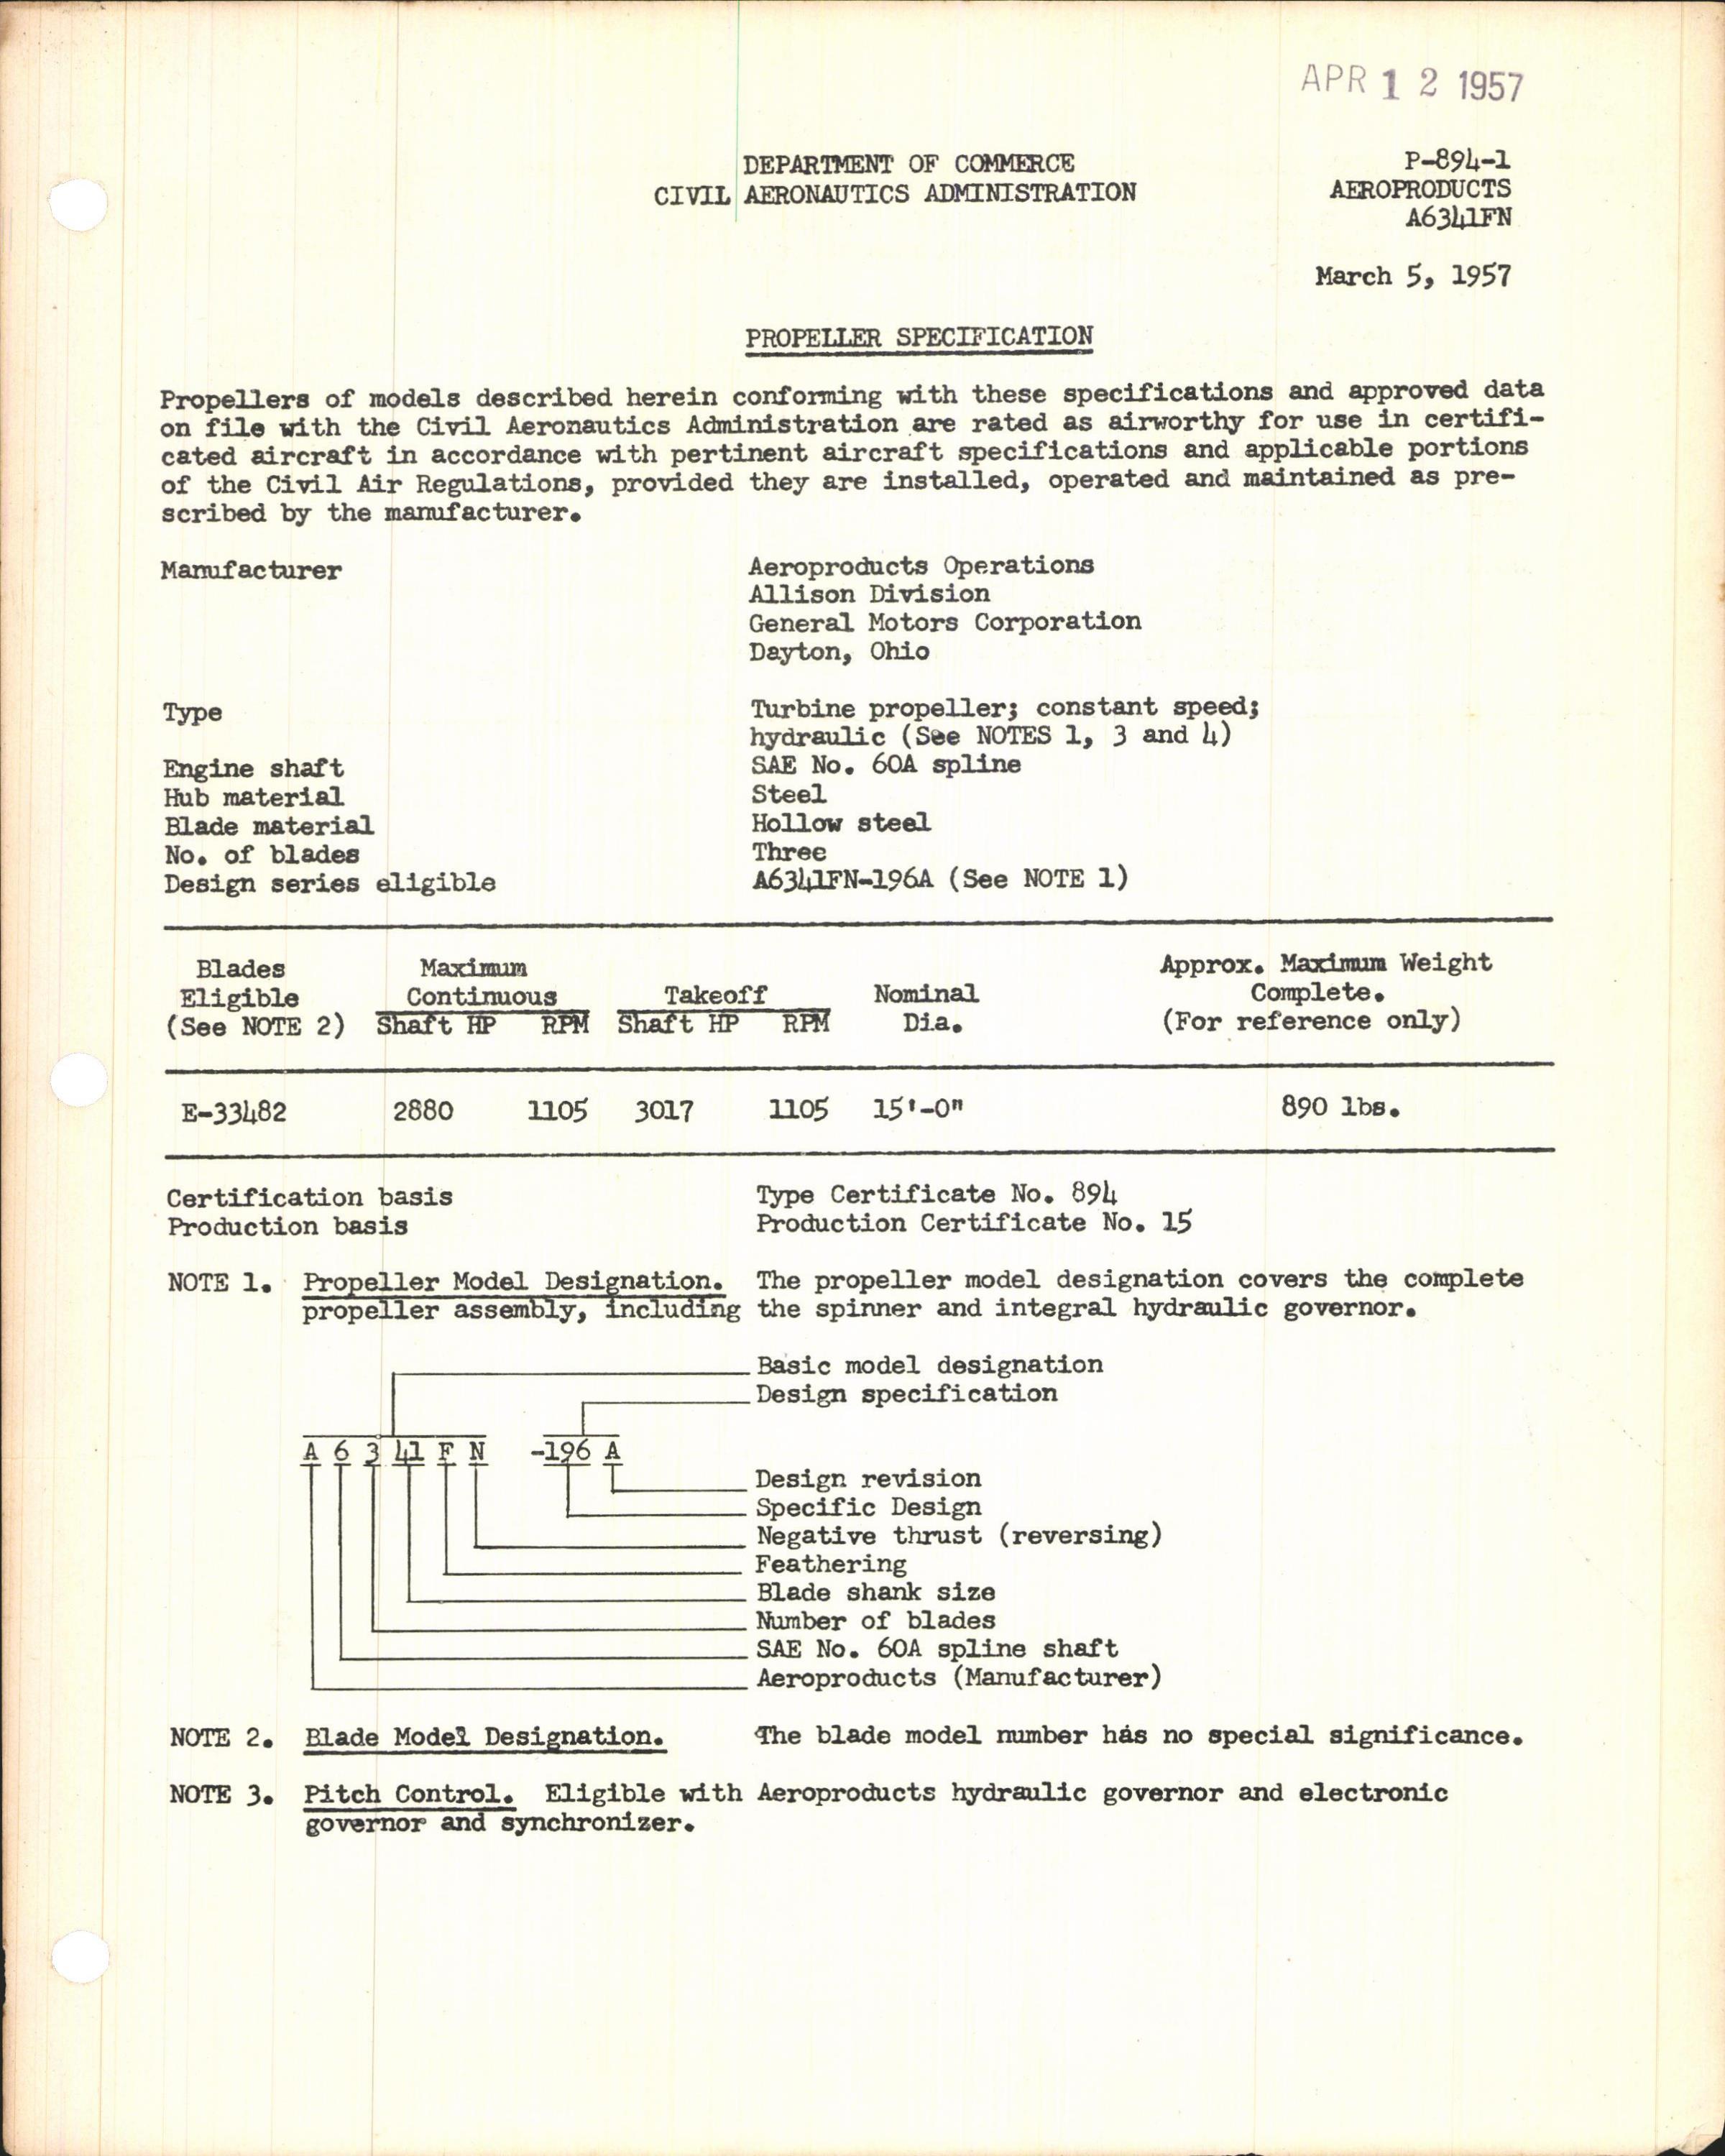 Sample page 1 from AirCorps Library document: A6341FN